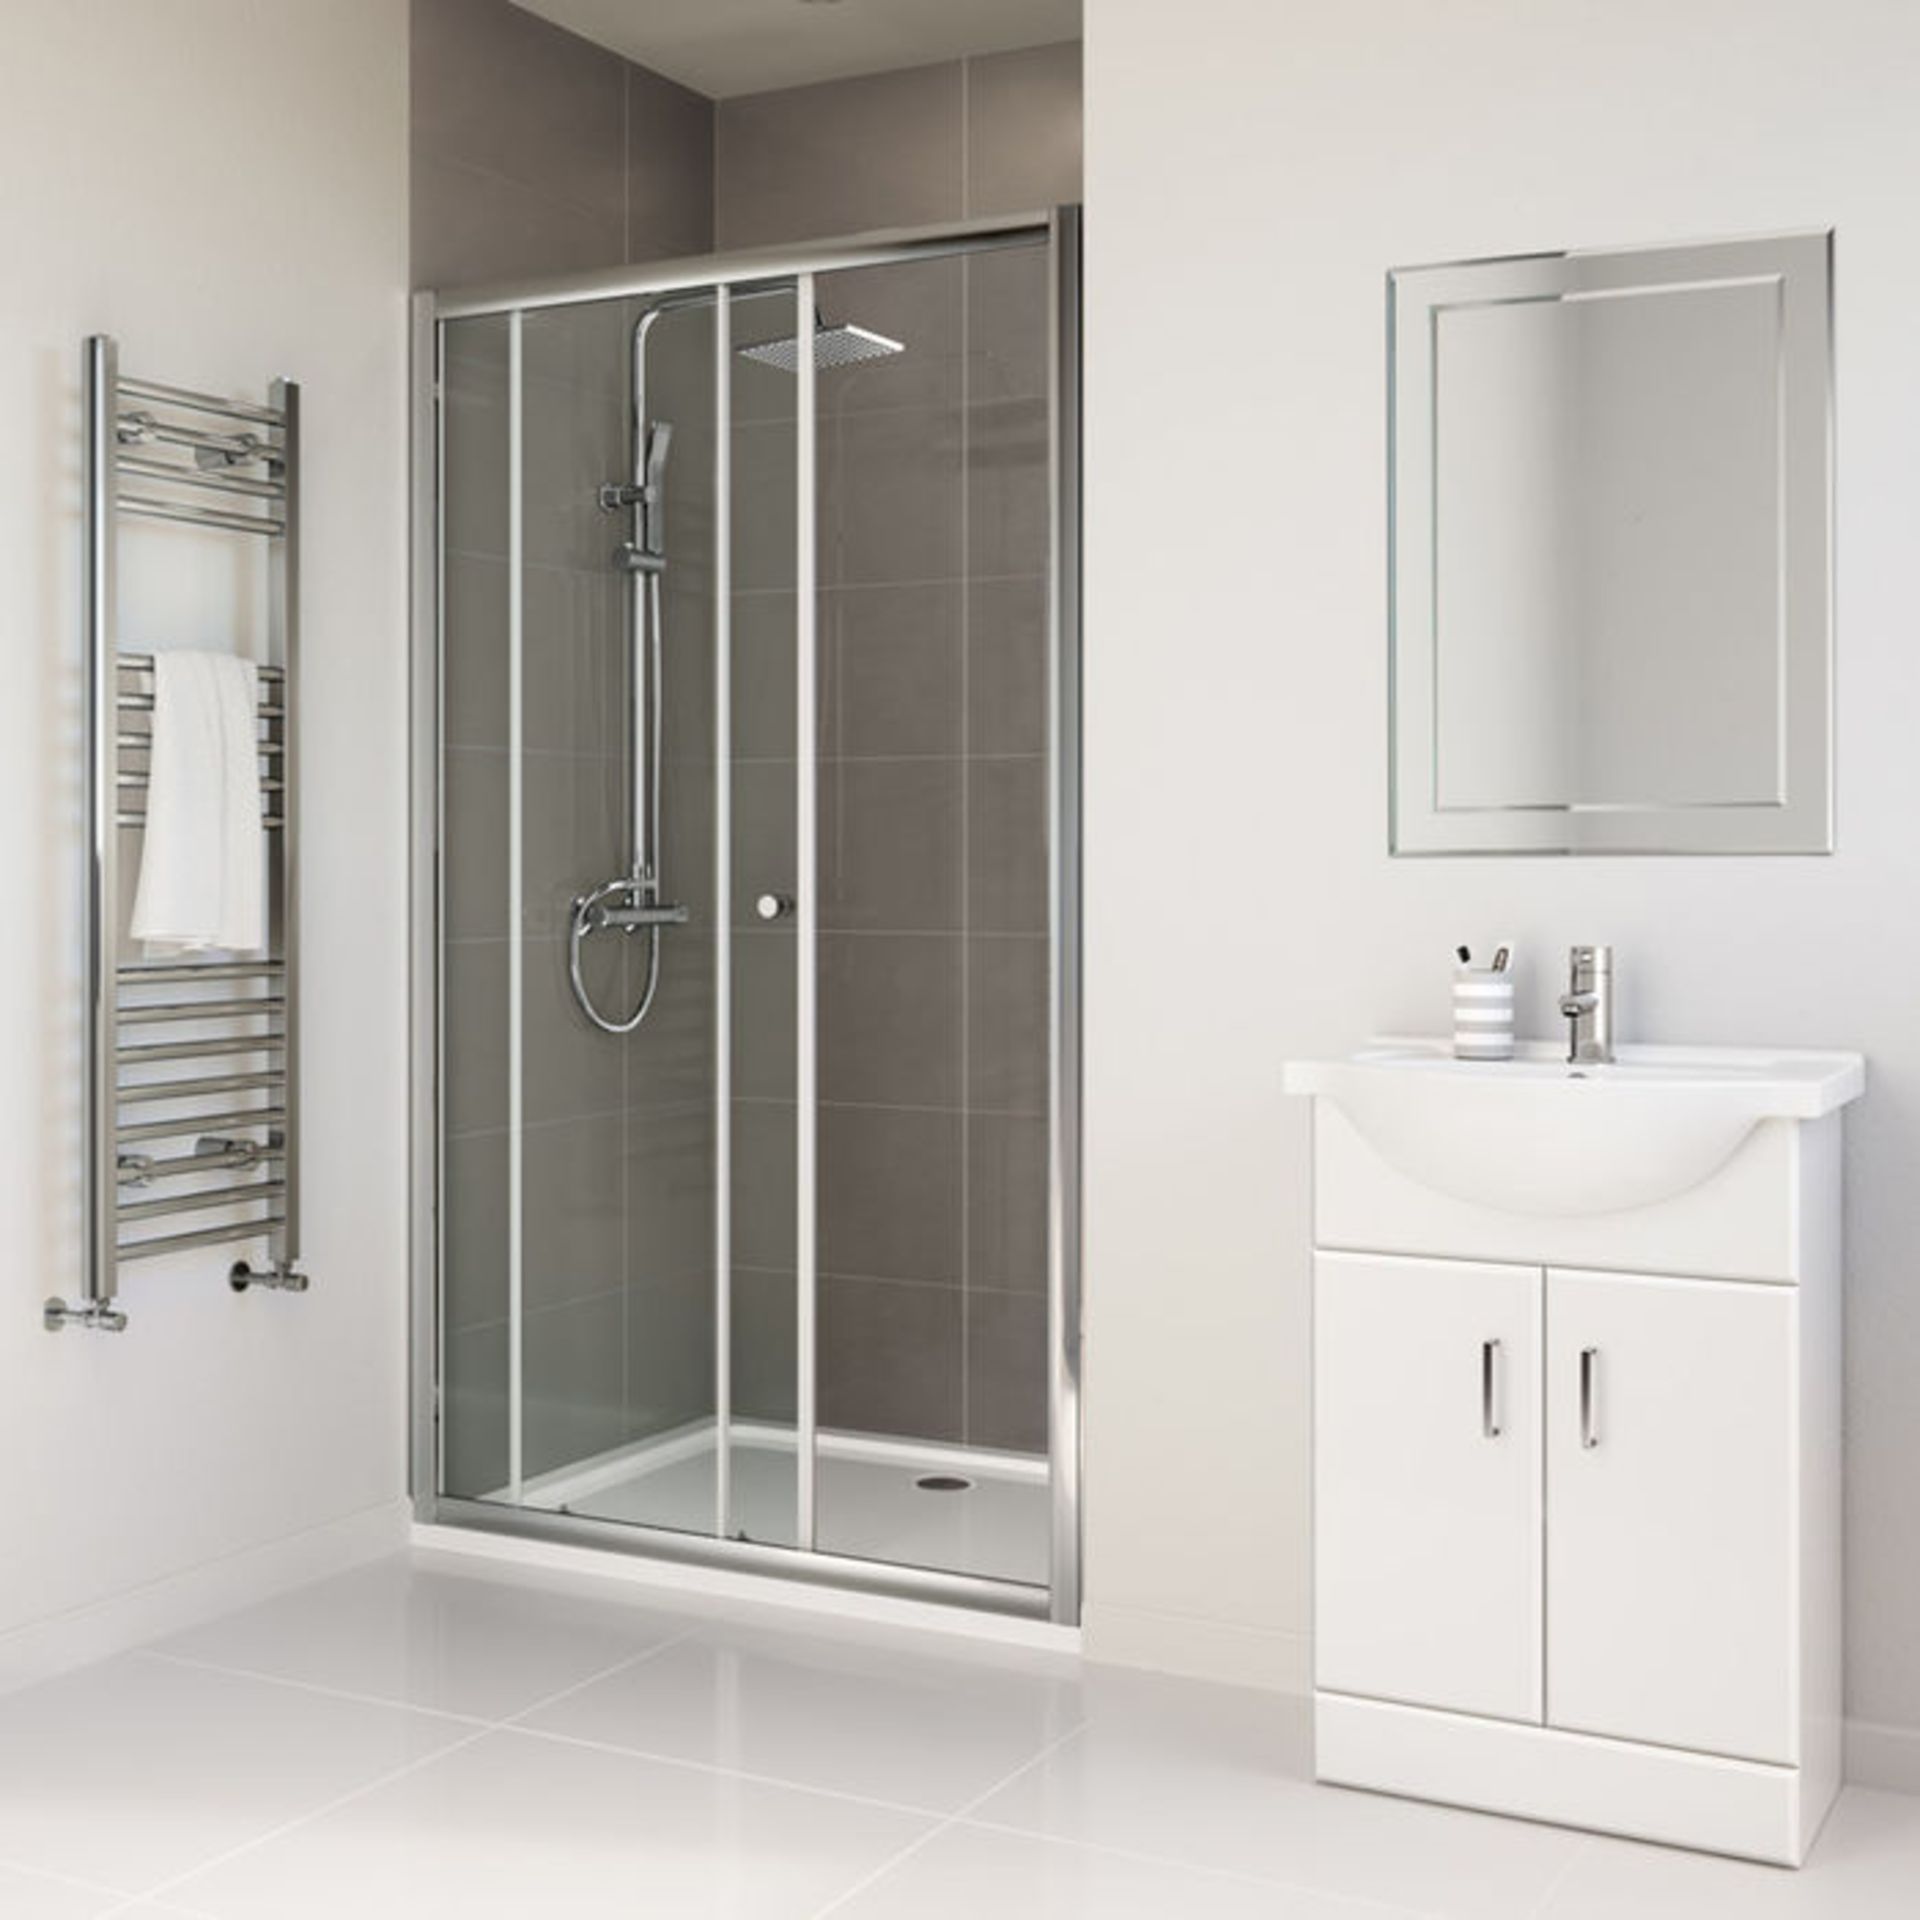 (TS101) 1200mm - Elements Sliding Shower Door. RRP £299.99. 4mm Safety Glass Fully waterproof tested - Image 3 of 4